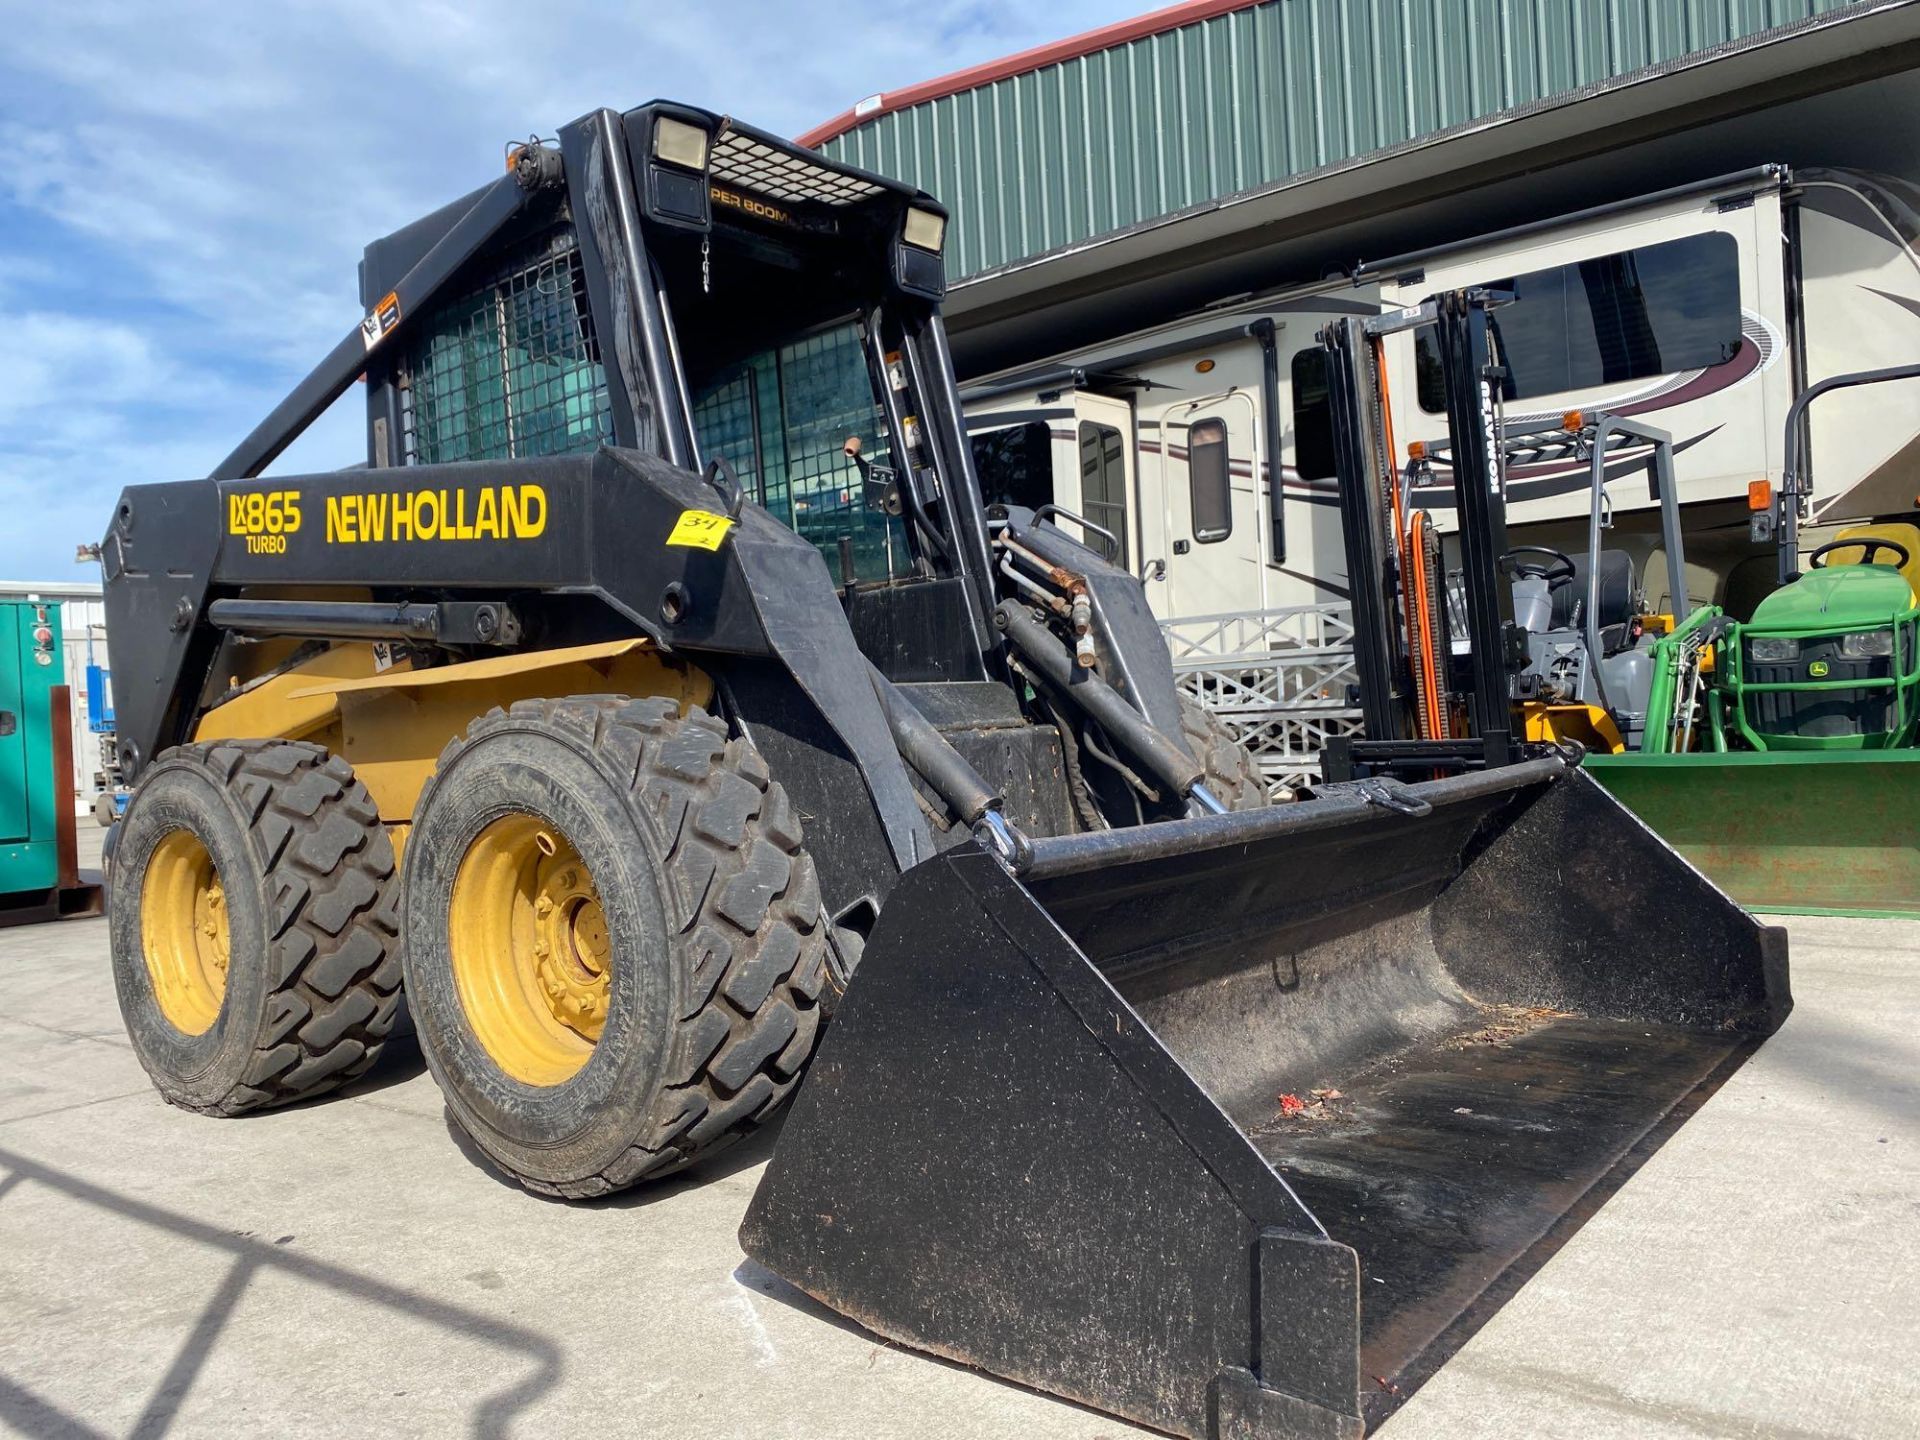 NEW HOLLAND LX865 TURBO DIESEL SKID STEER, BUCKET ATTACHMENT, RUNS AND OPERATES - Image 2 of 5